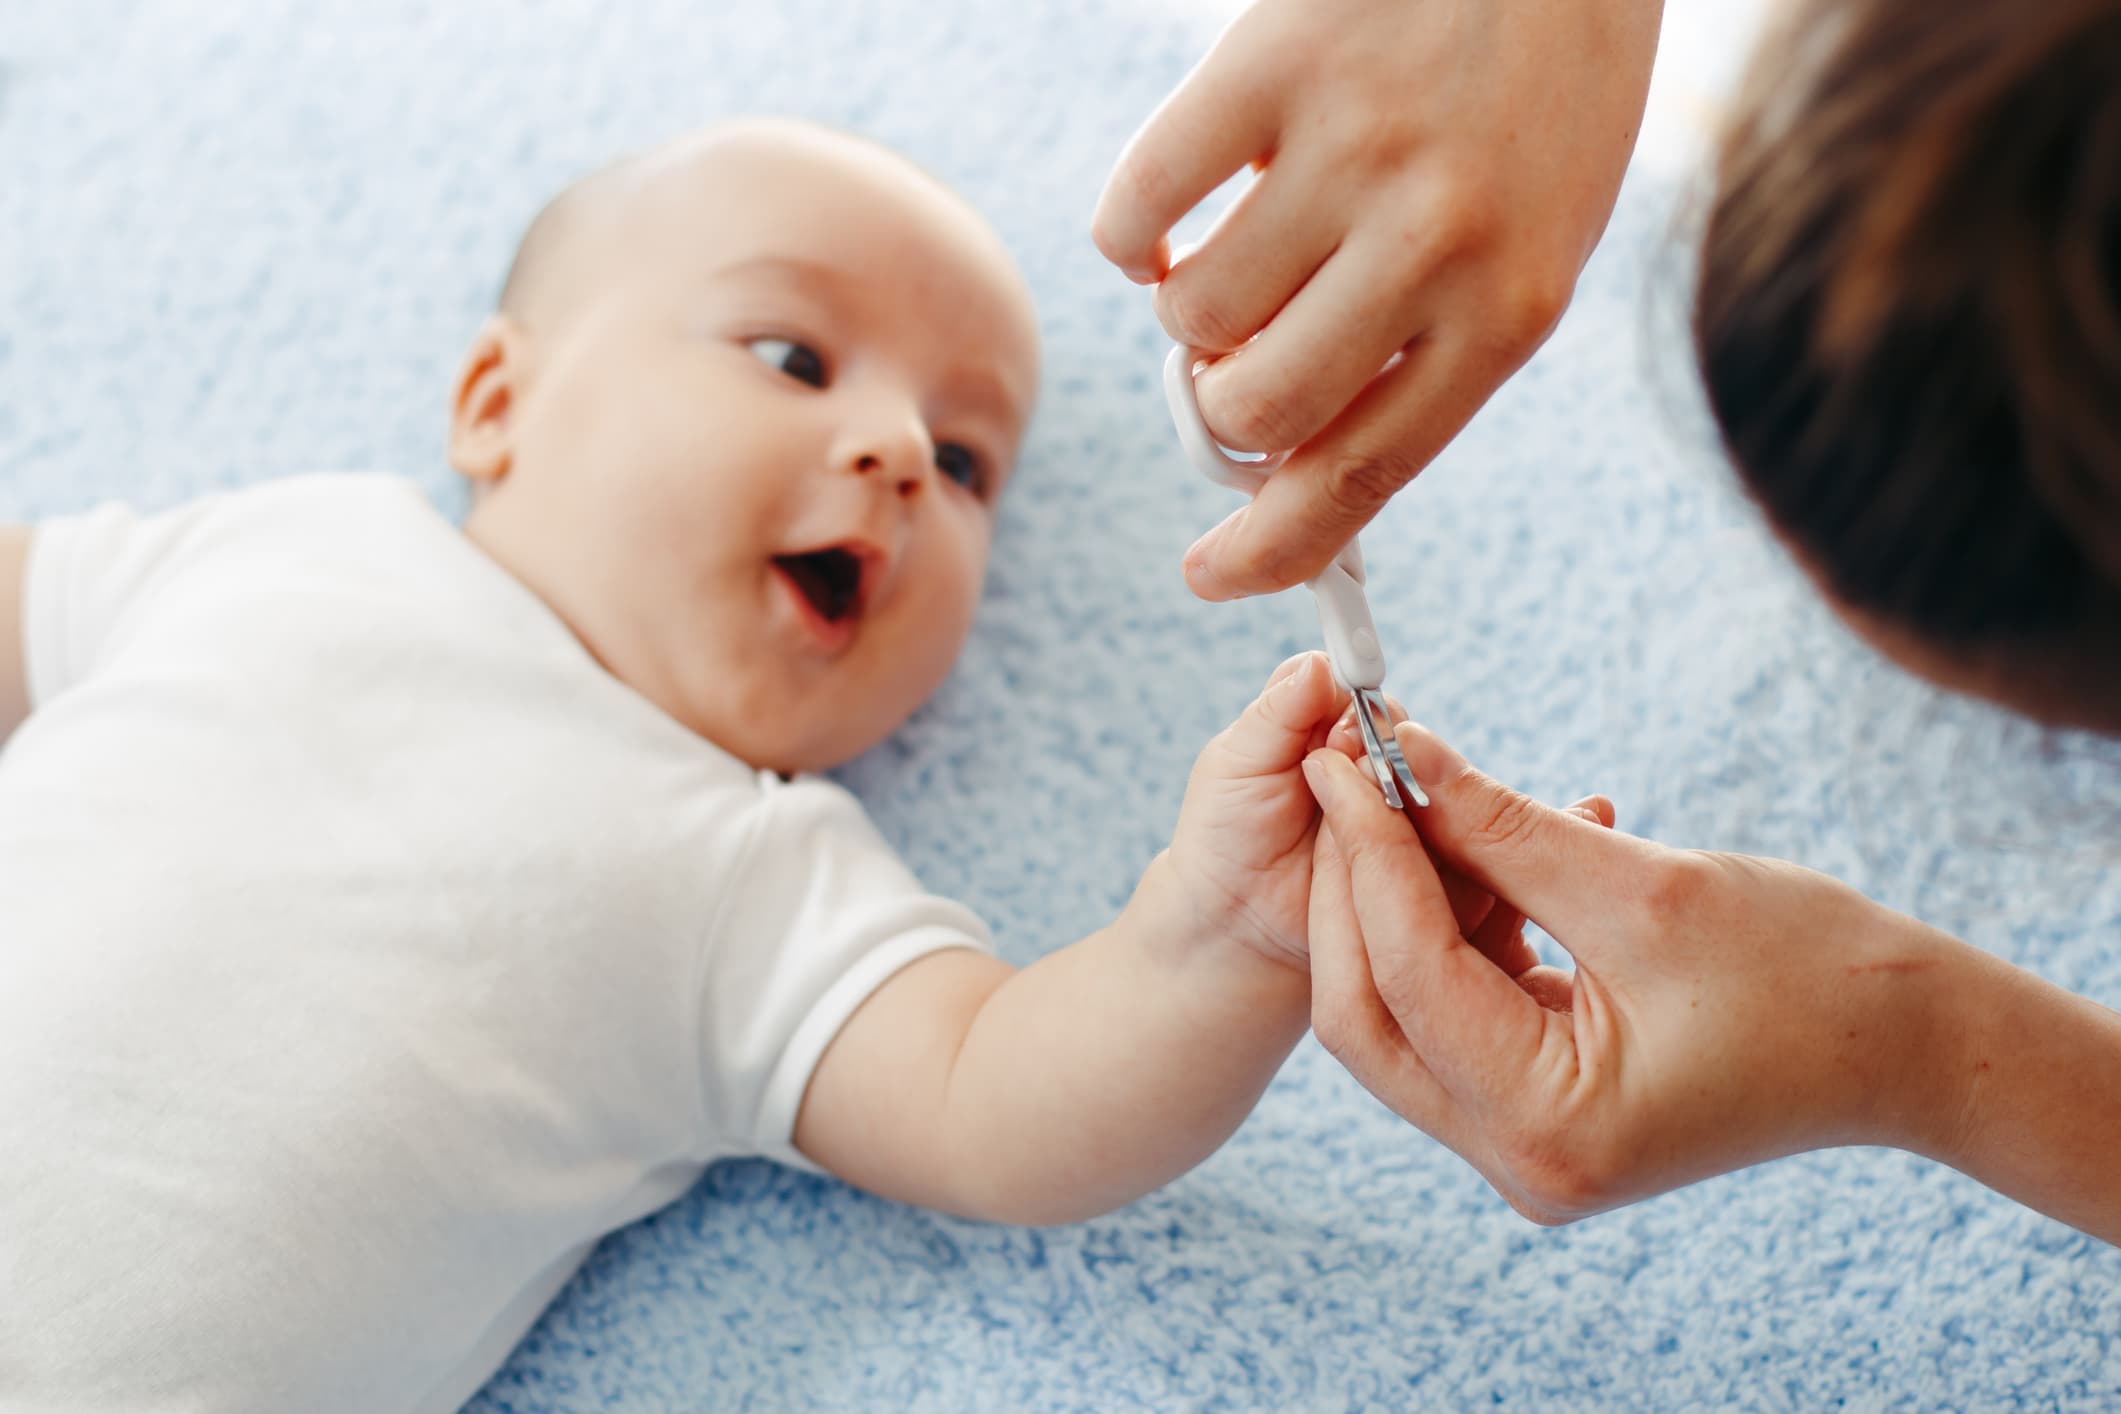 Tips on How to Safely Clip Your Baby's Fingernails - Baby Chick